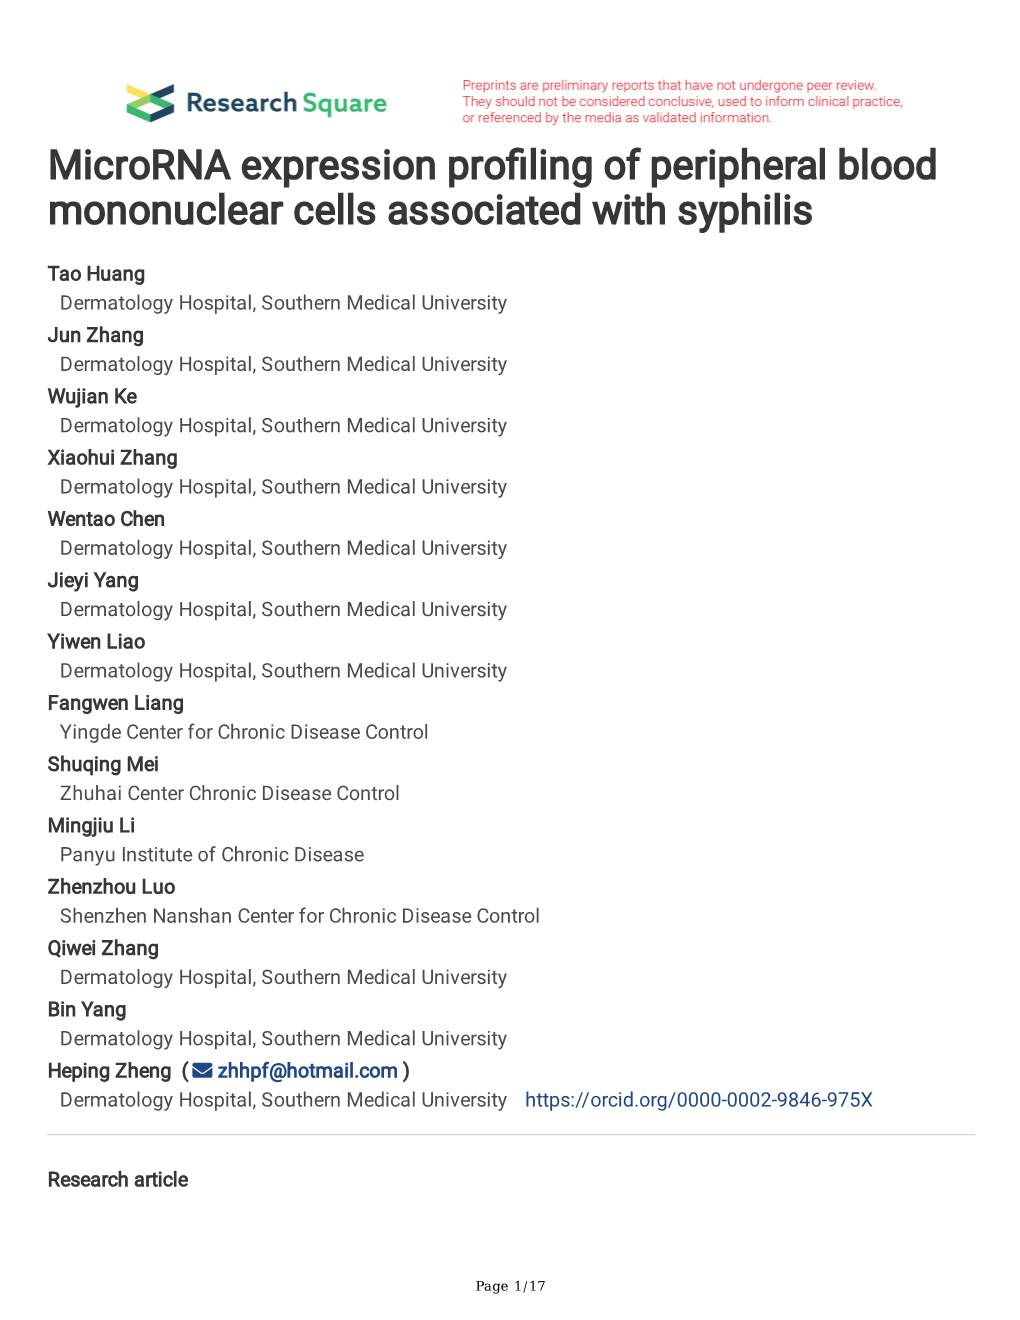 Microrna Expression Profiling of Peripheral Blood Mononuclear Cells Associated with Syphilis